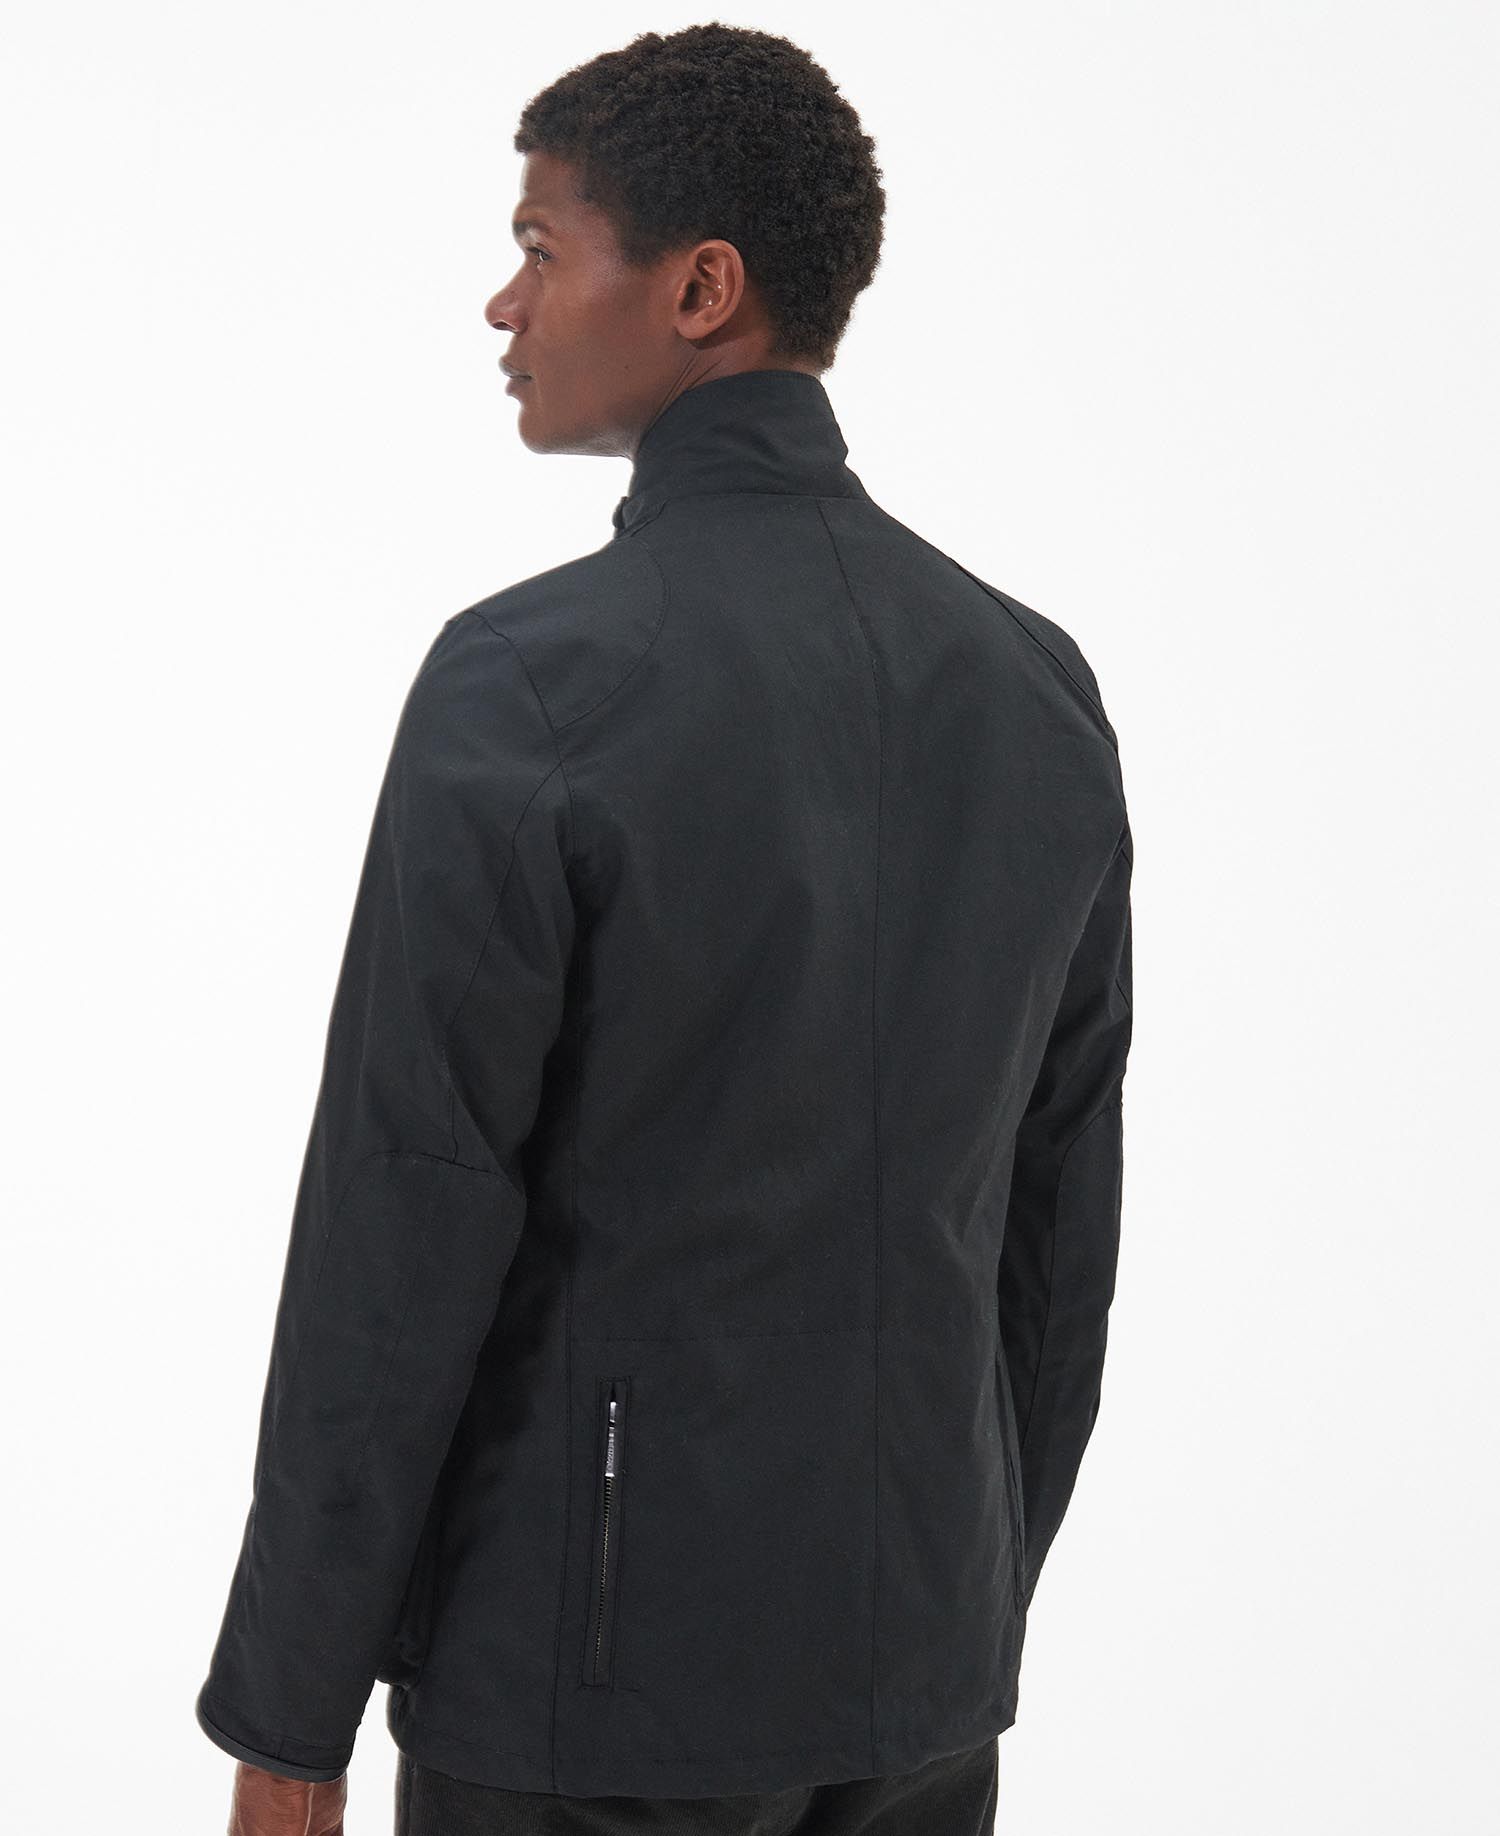 Shop the Barbour Beacon Sports Wax Jacket in Black today. | Barbour